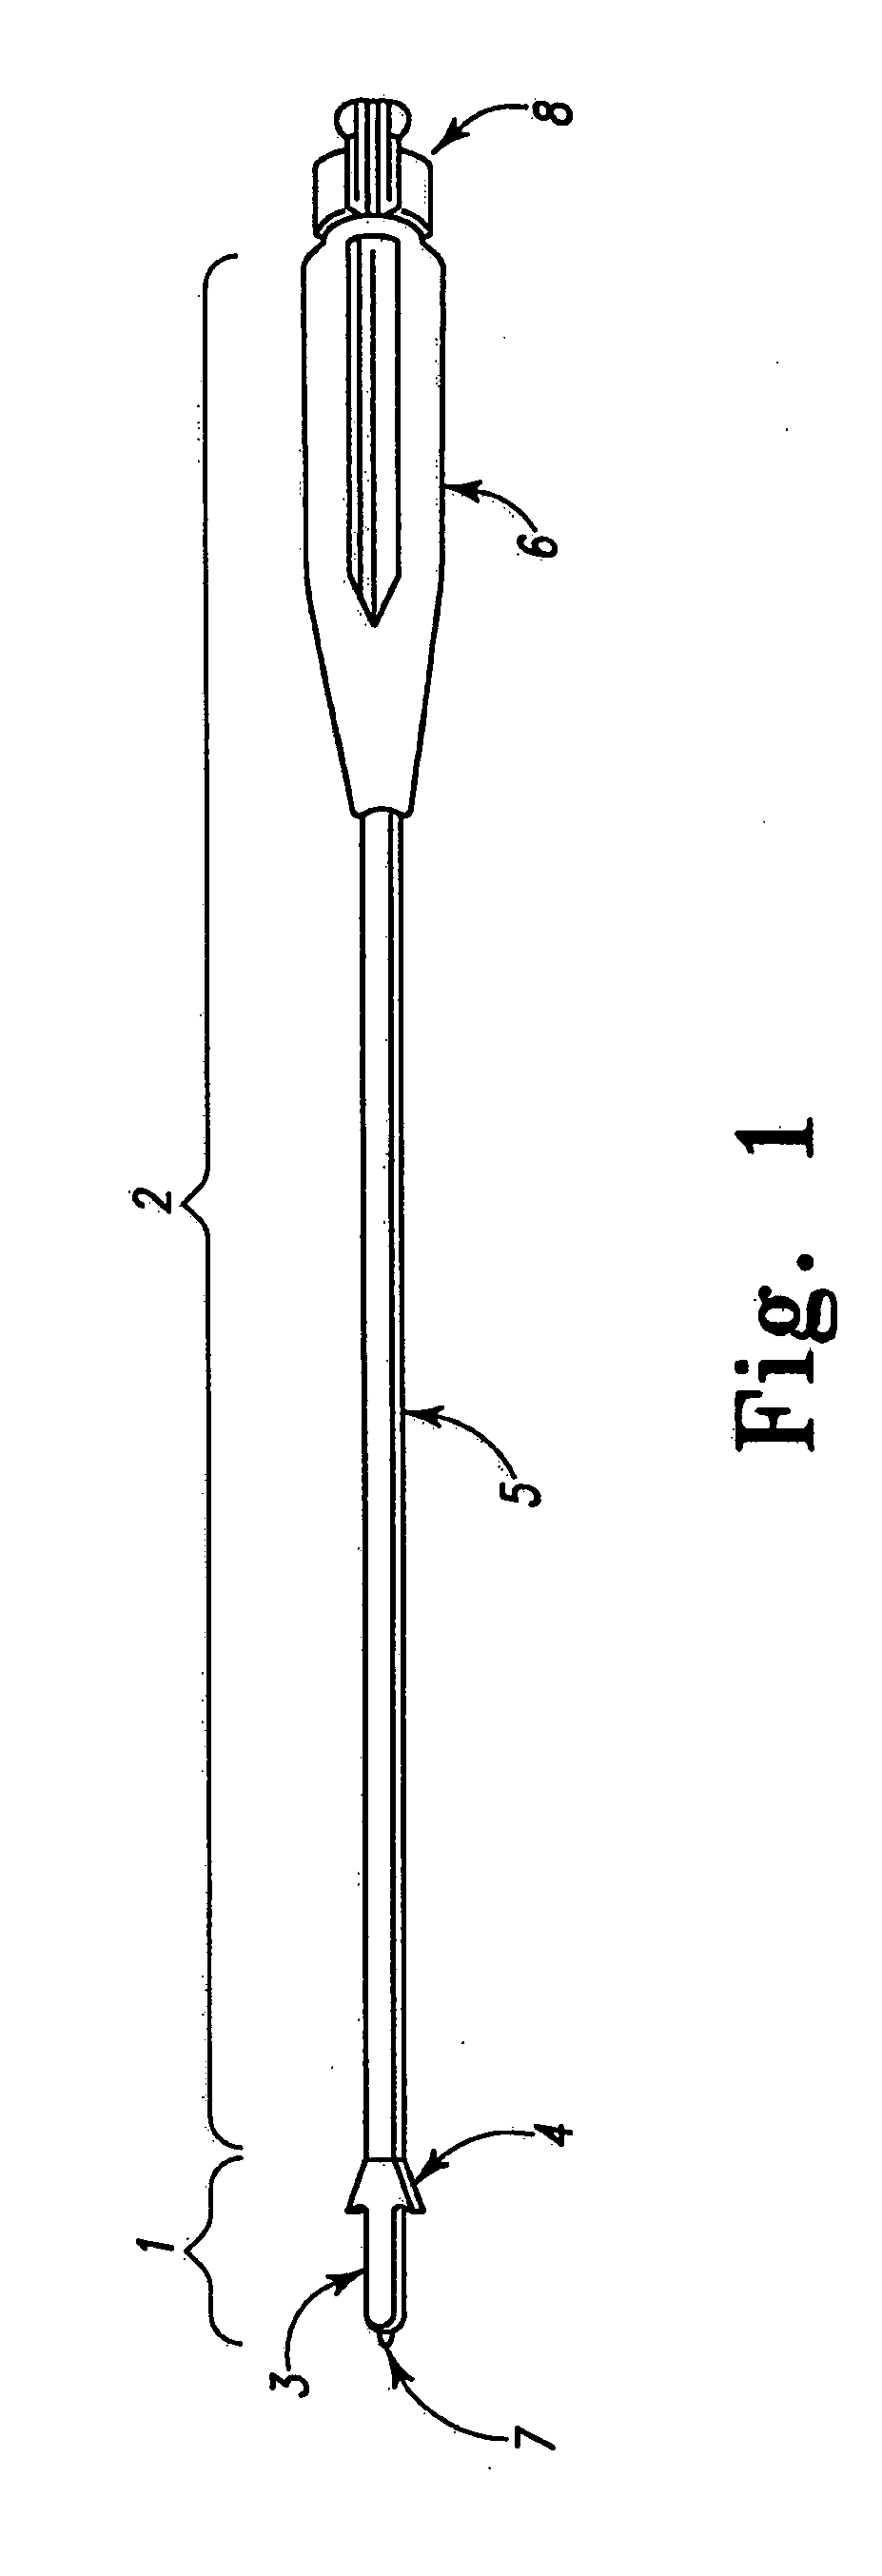 Interior connecting interbody cage insertional tools, methods and devices